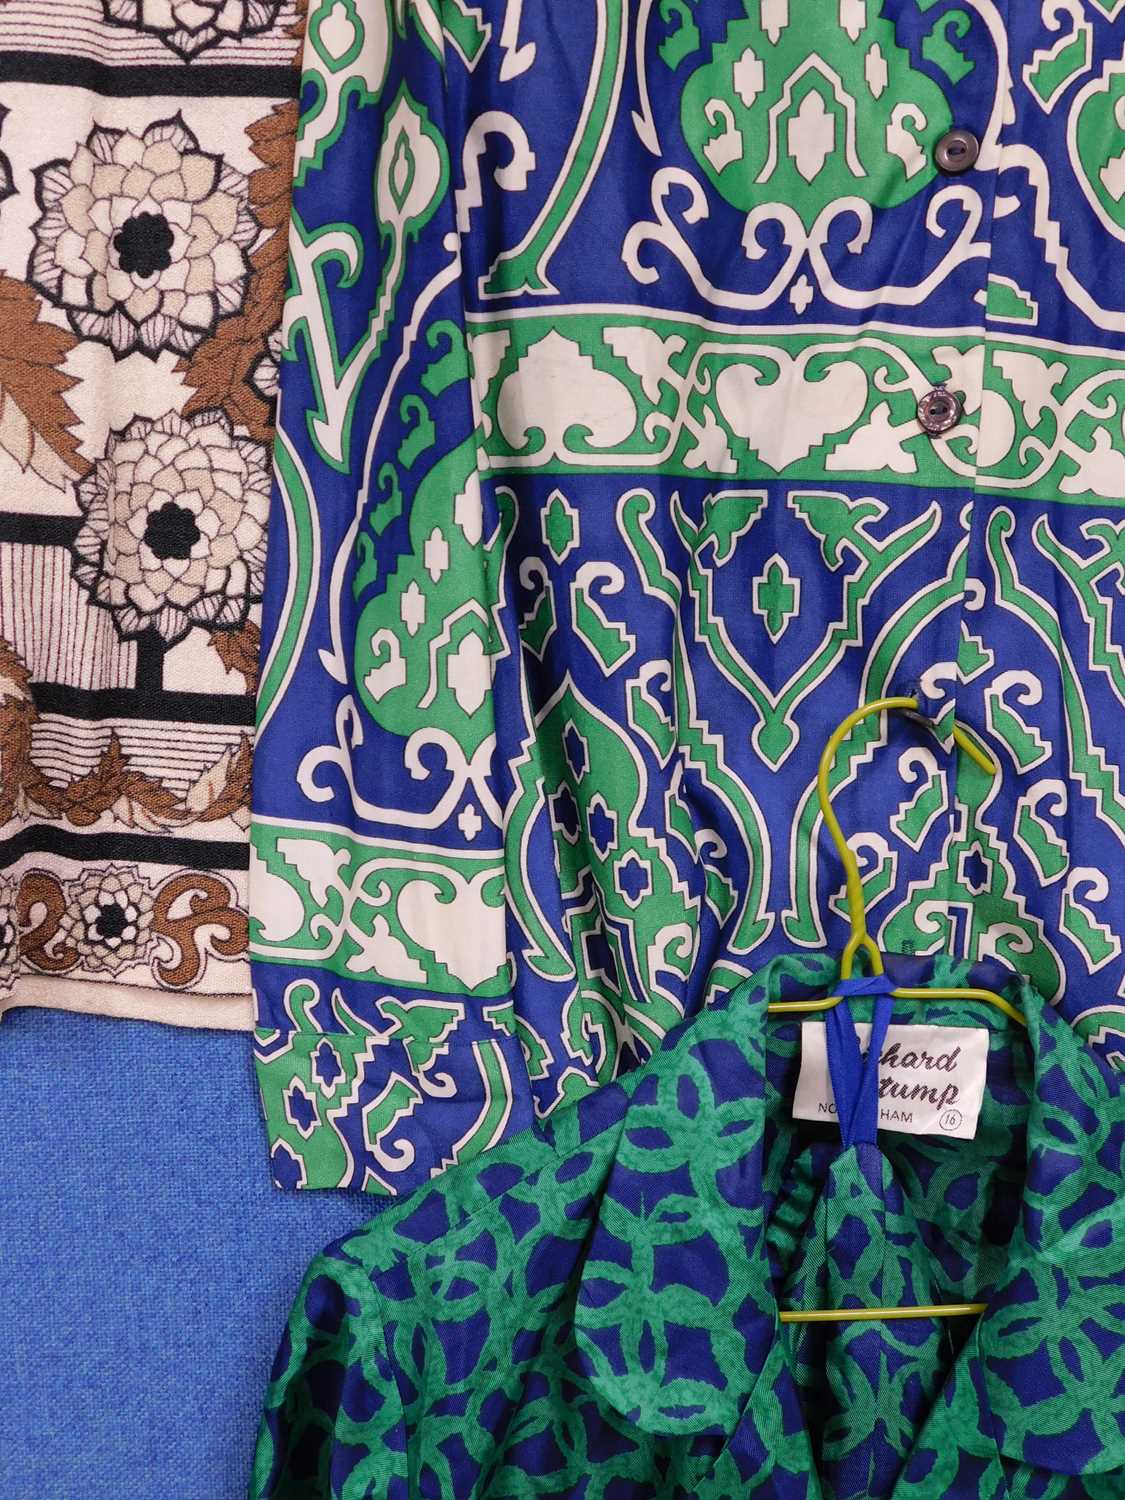 A selection of mid 20th century printed ladies tops to include a green and blue satin matching - Image 2 of 2